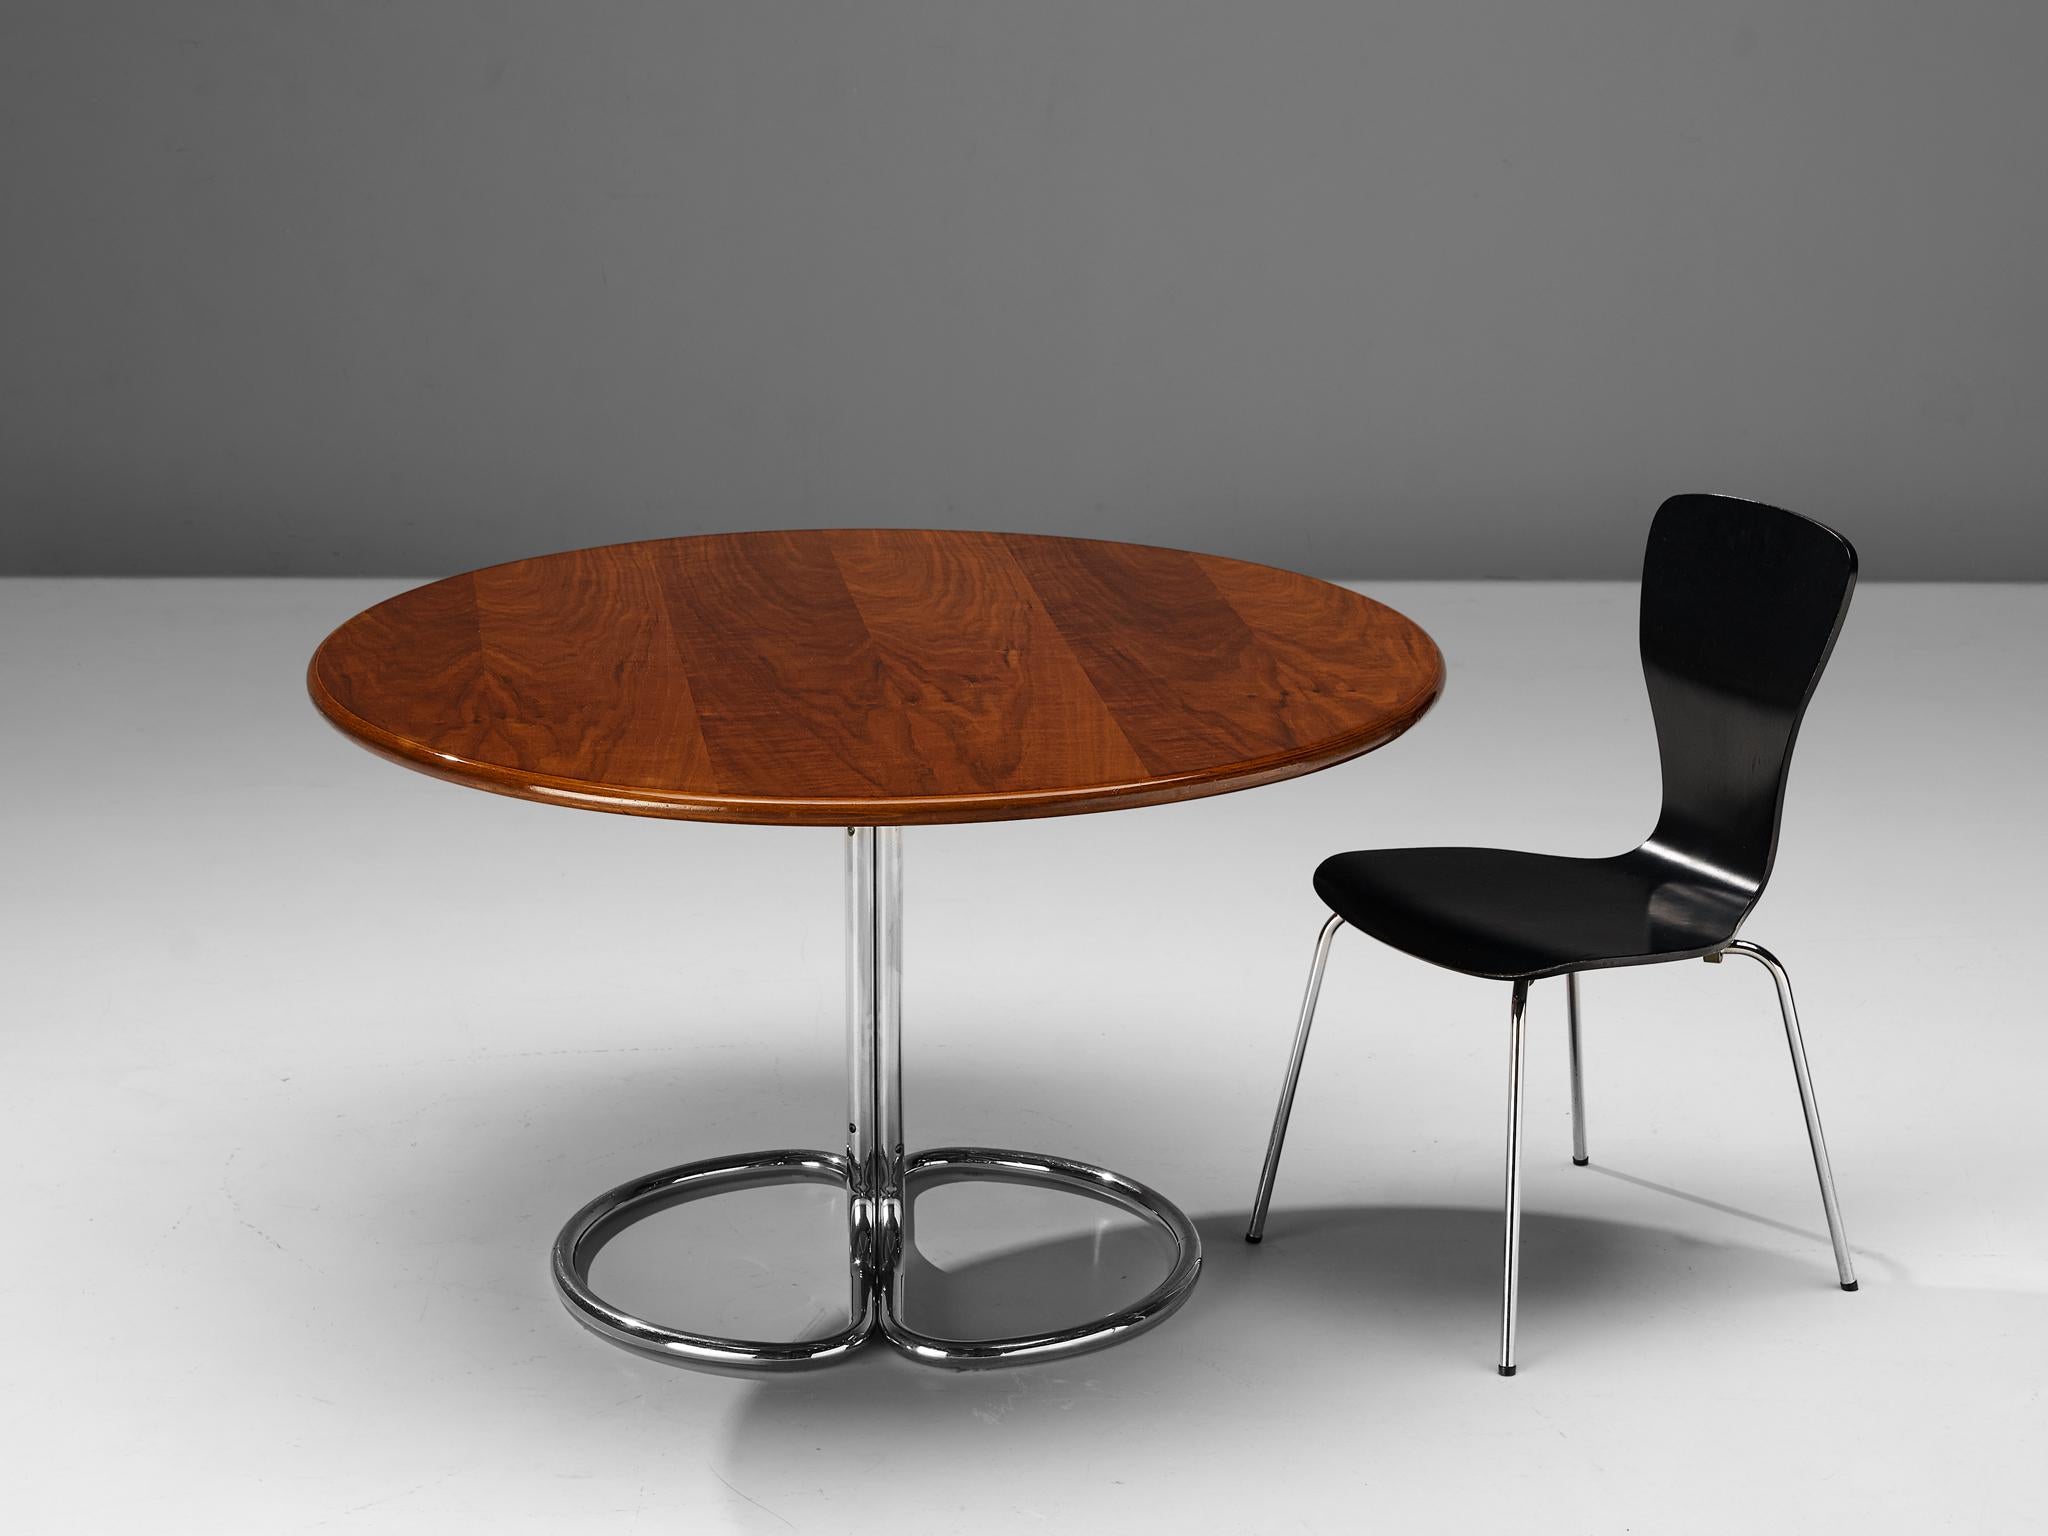 Giotto Stoppino 'Maia' Table in Walnut with Tapio Wirkkala ‘Nikke’ Dining Chairs For Sale 1